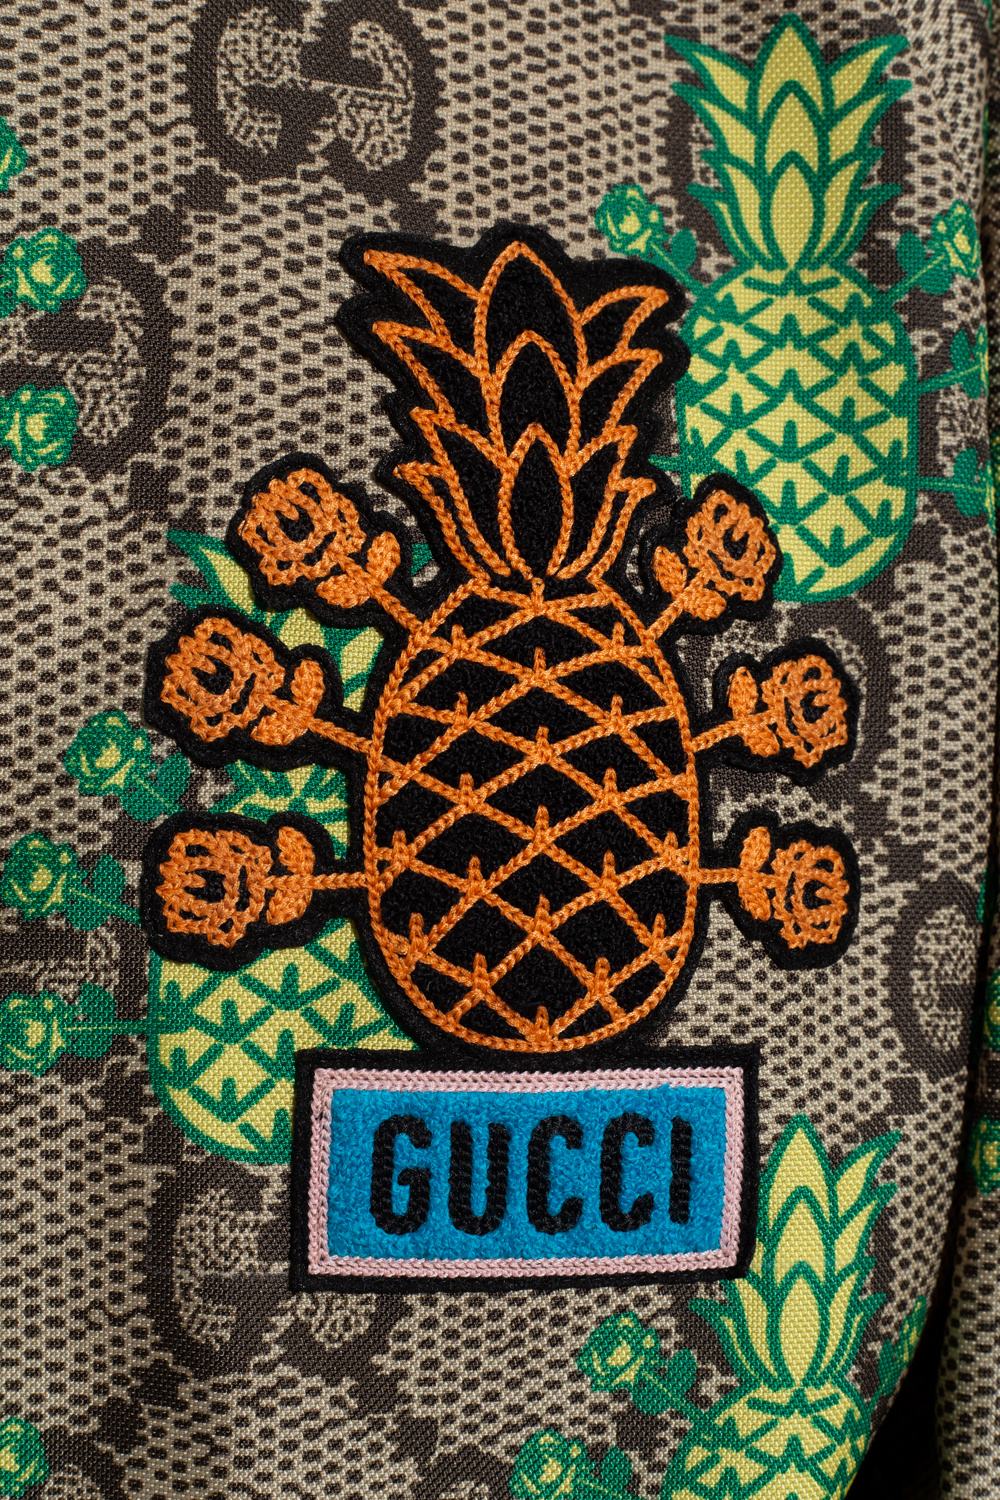 Gucci The ‘Gucci Pineapple’ collection jacket